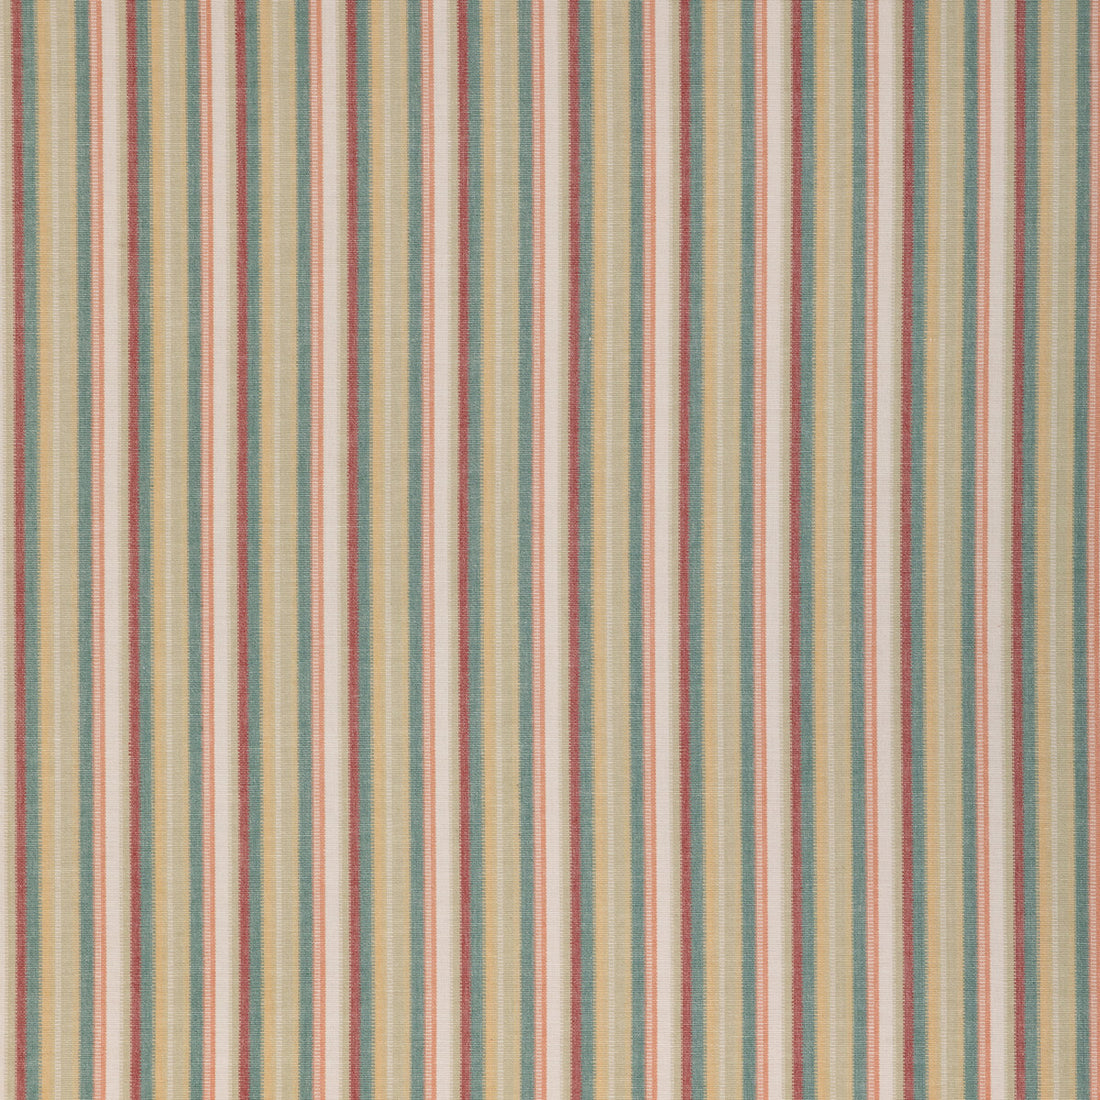 Sandbanks Stripe fabric in kiwi/teal color - pattern 2023105.353.0 - by Lee Jofa in the Highfield Stripes And Plaids collection